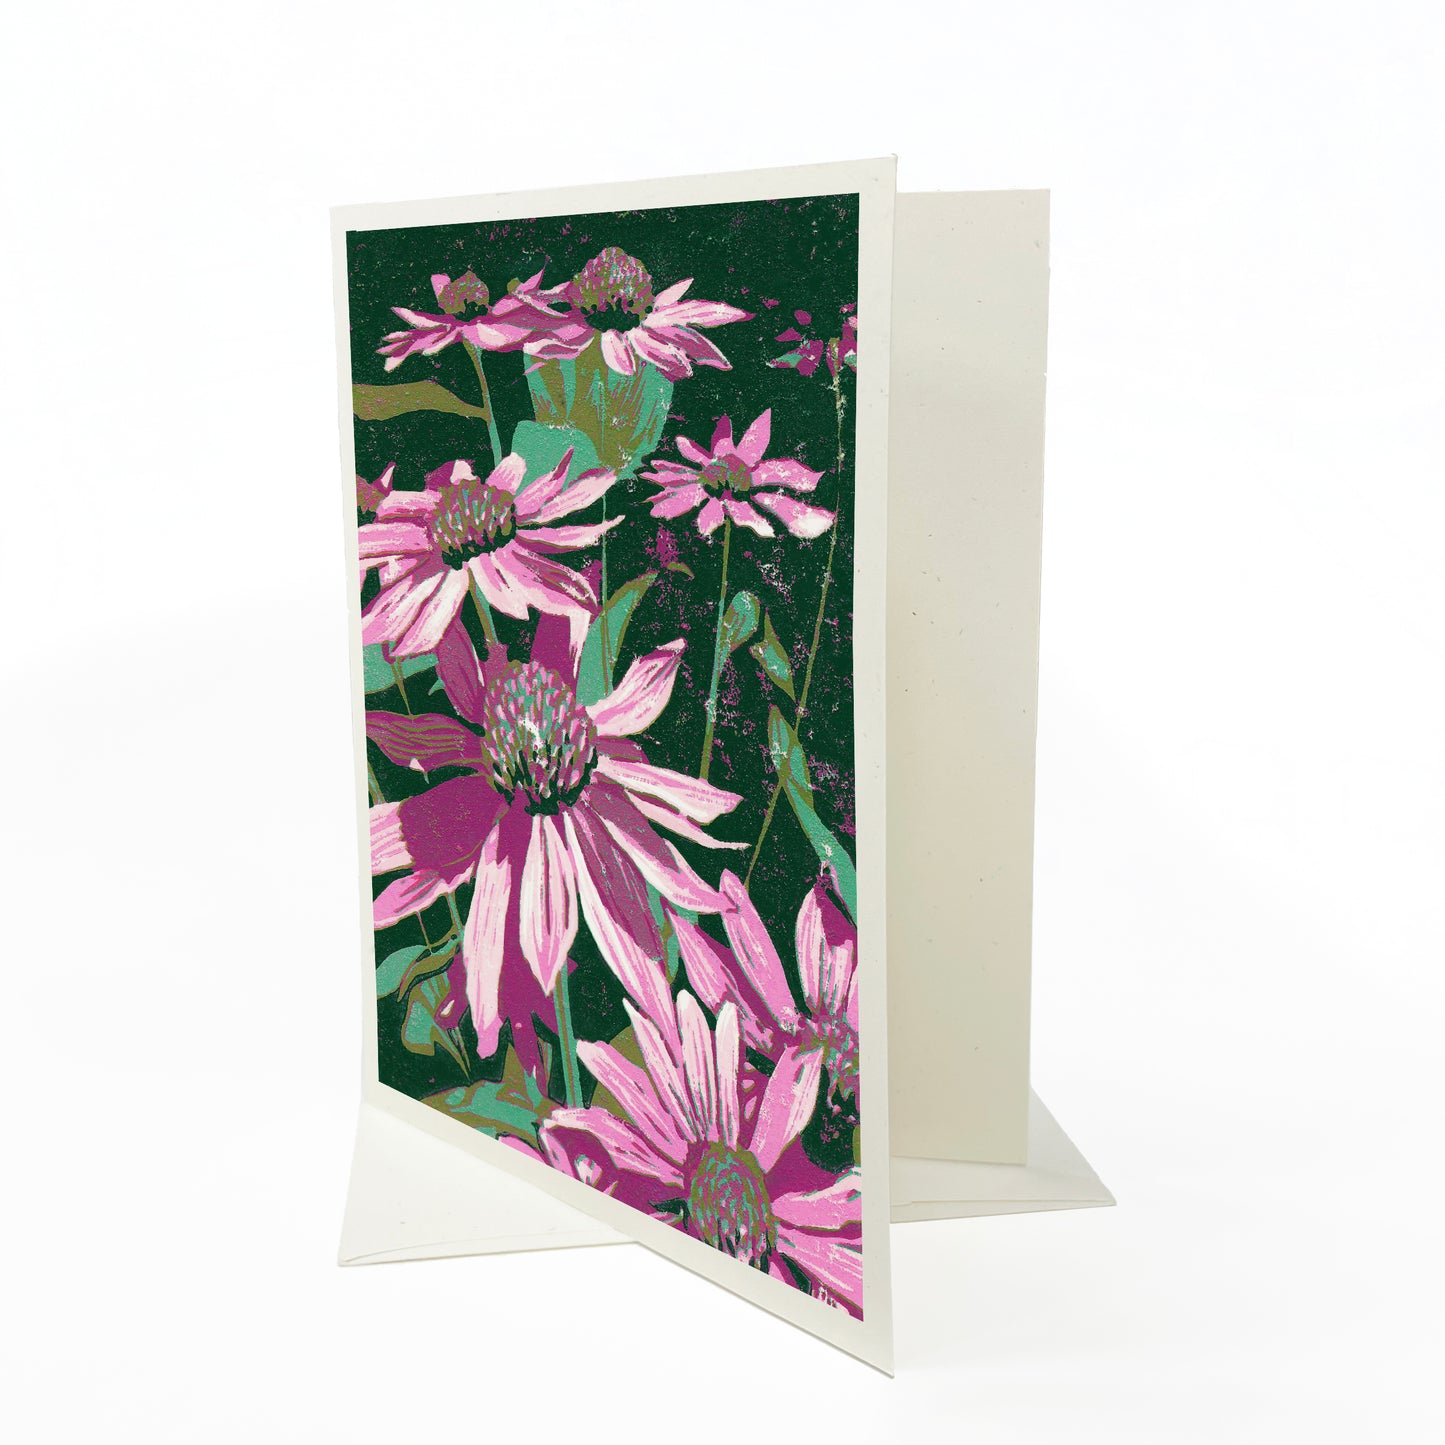 A casually elegant card featuring floral art by Natalia Wohletz titled Echinacea.